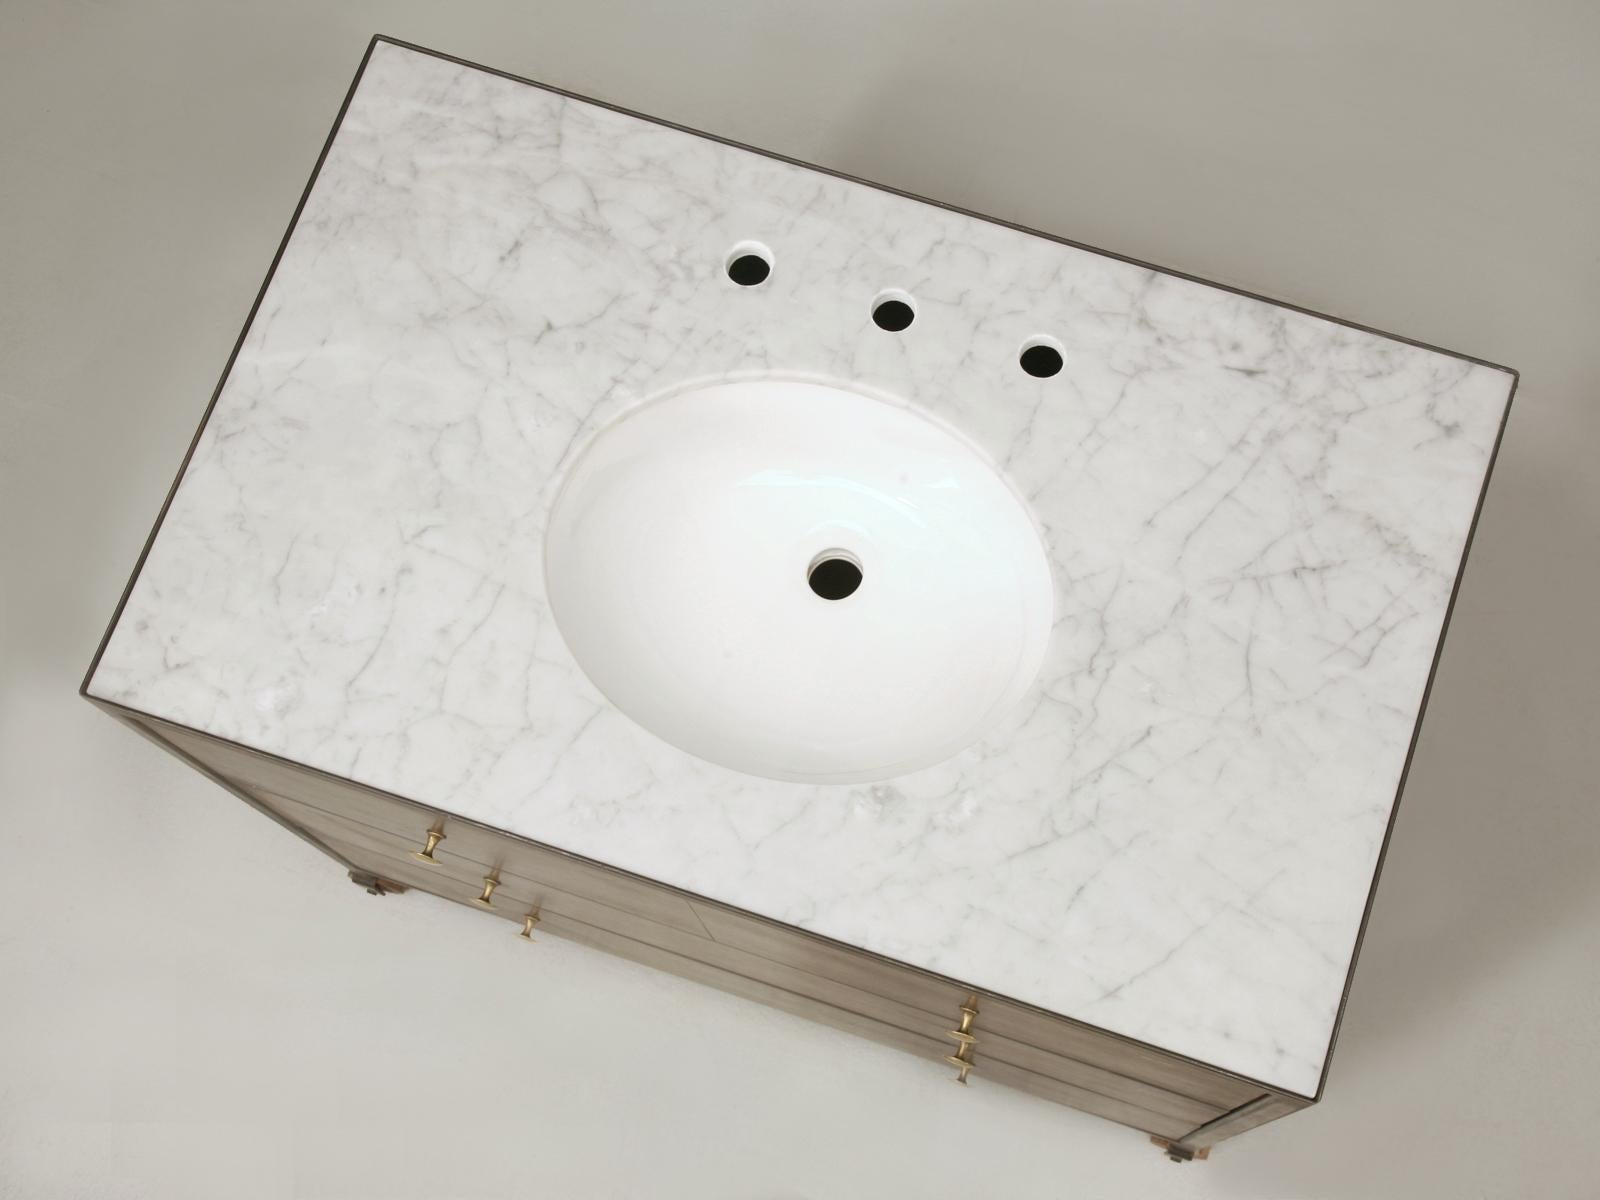 French industrial style steel clad commode or sink base custom made by our Old Plank craftsmen. The interior is wood and can be painted any color. It can be made in any size as a commode or a vanity - the price shown does not include a marble top